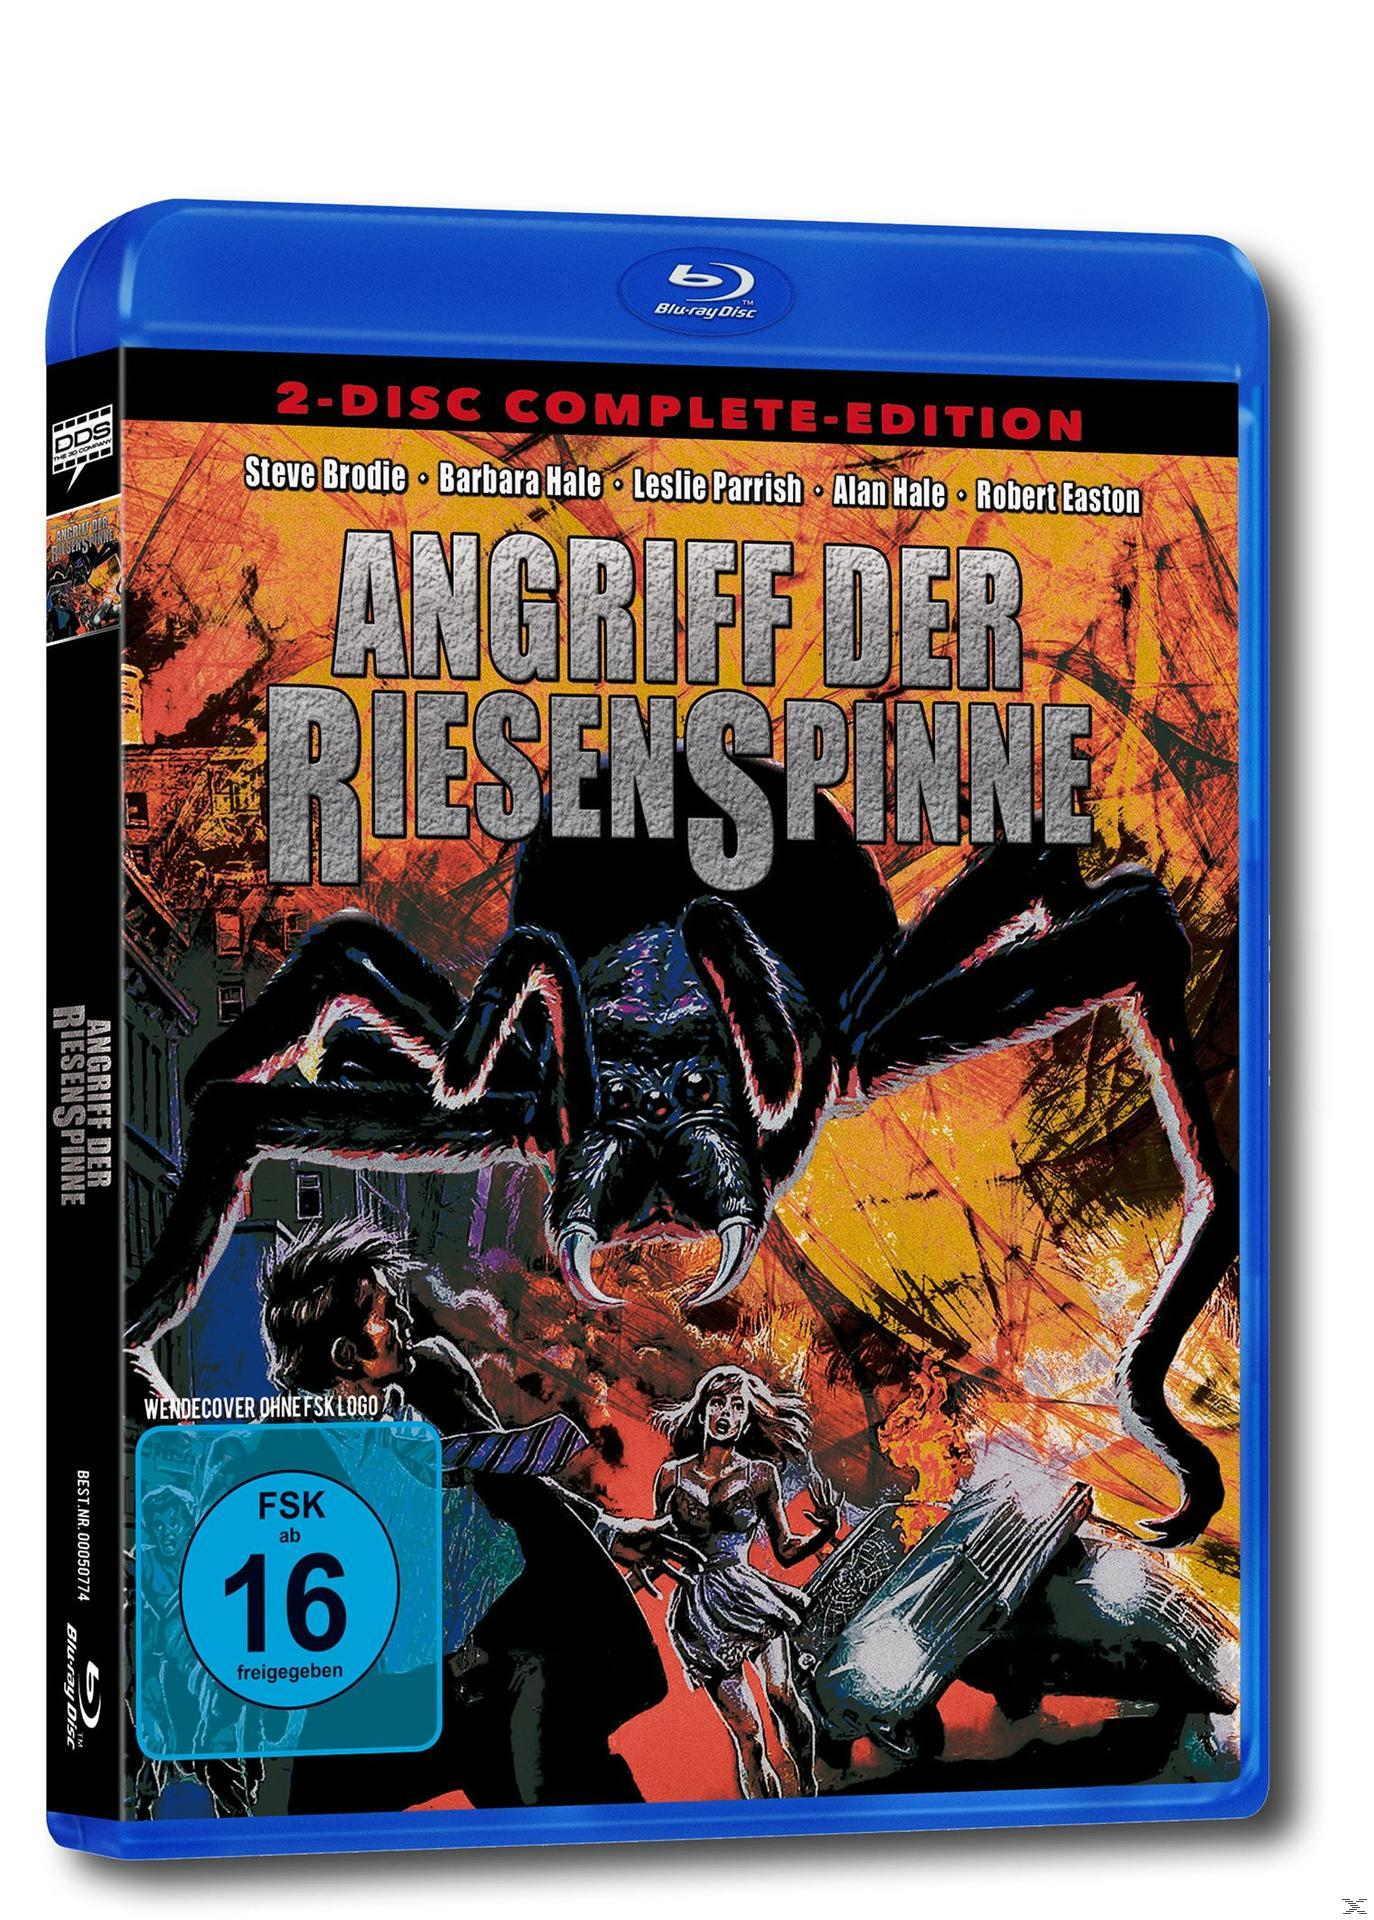 Angriff der Riesenspinne Blu-ray Edition Complete 